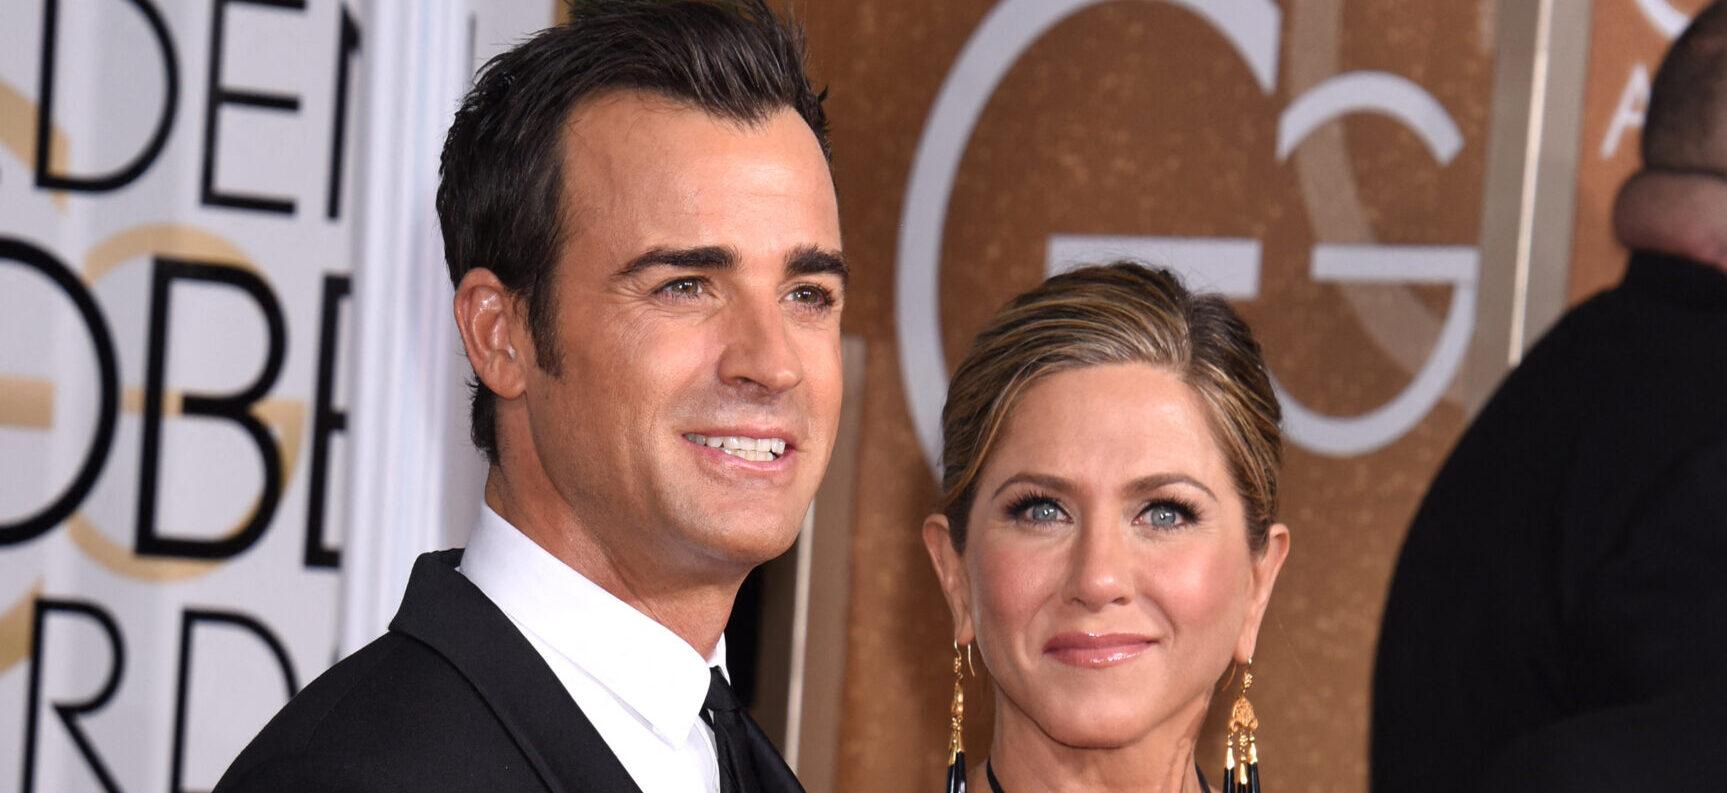 Jennifer Aniston Reportedly Found ‘Close Source Of Comfort’ In Ex Justin Theroux After Dad’s Death